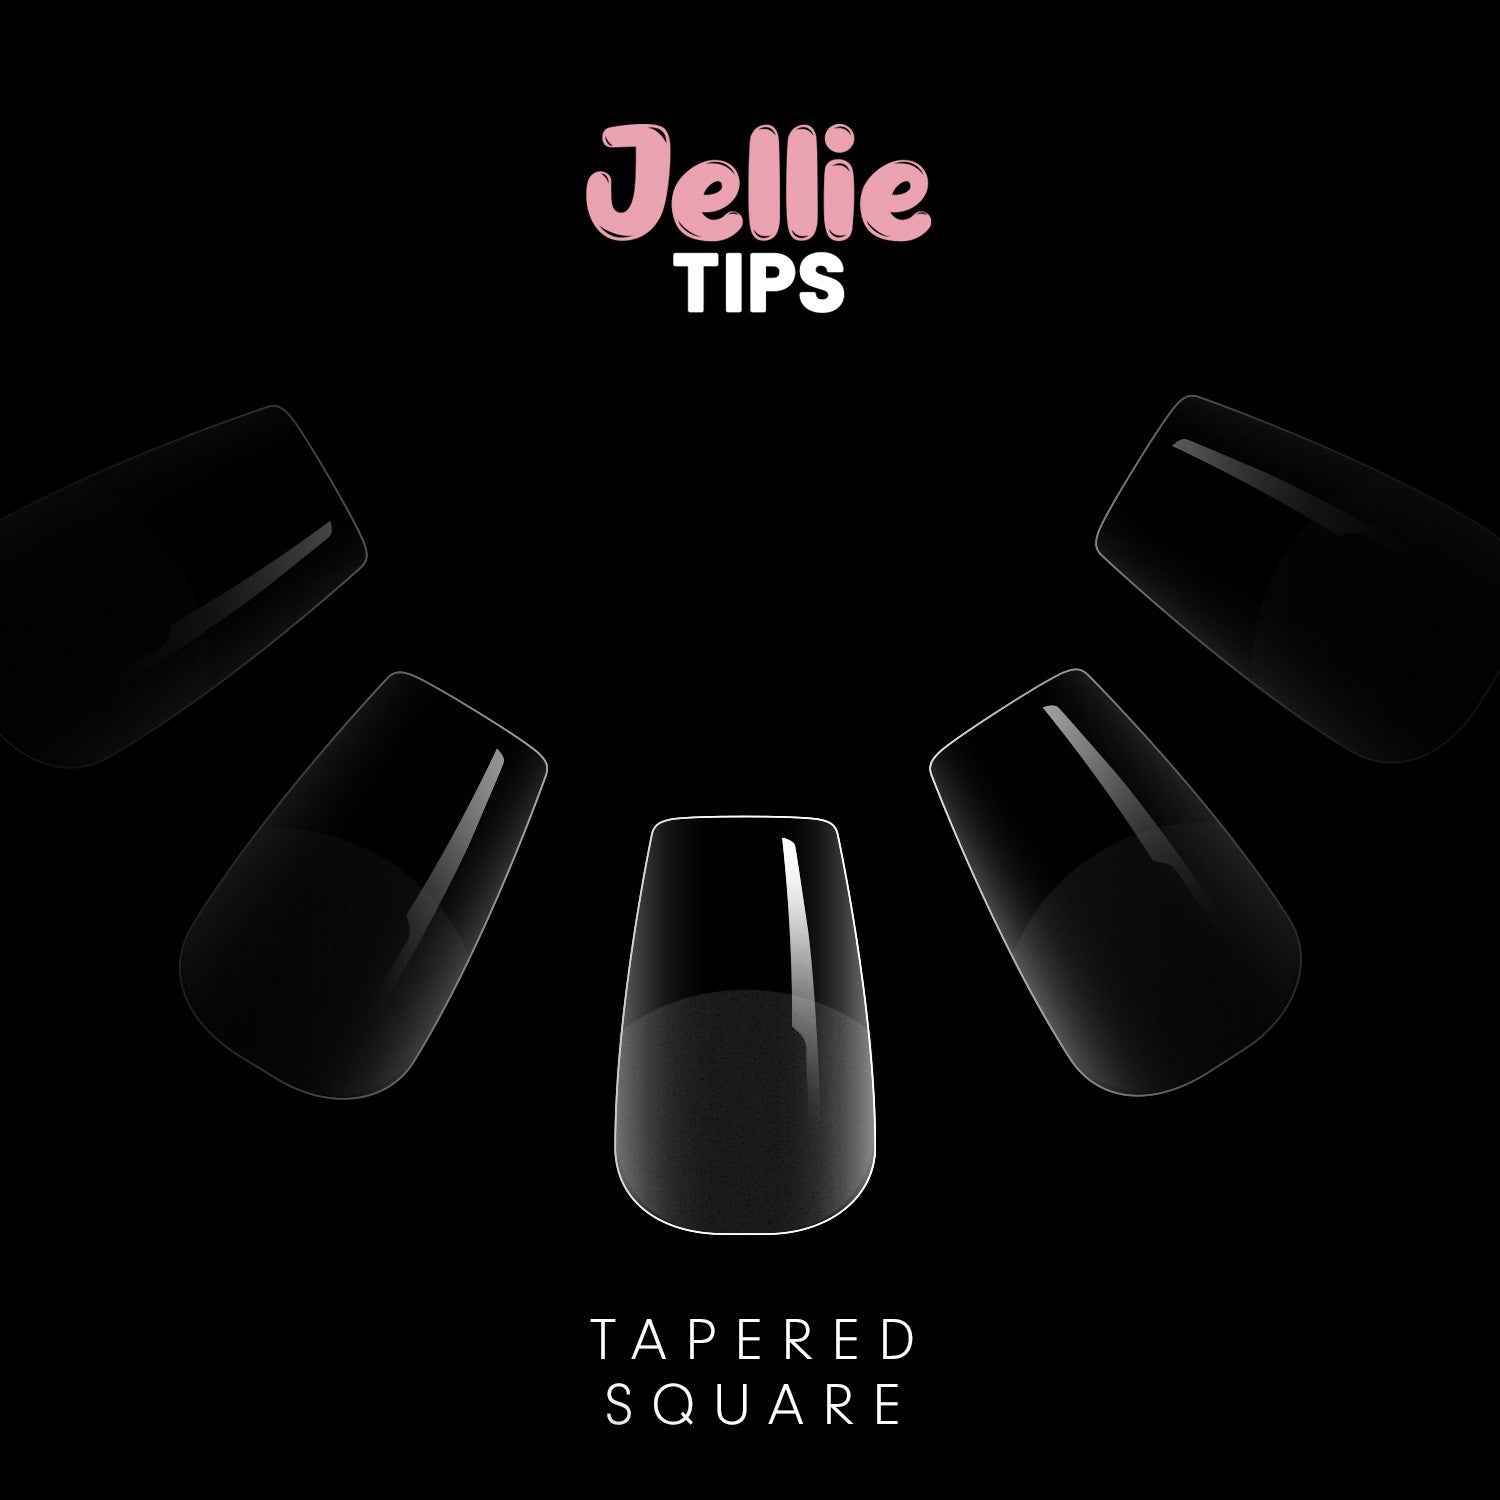 Halo Jellie Nail Tips Tapered Square, Sizes 0-11, 120 Mixed Sizes